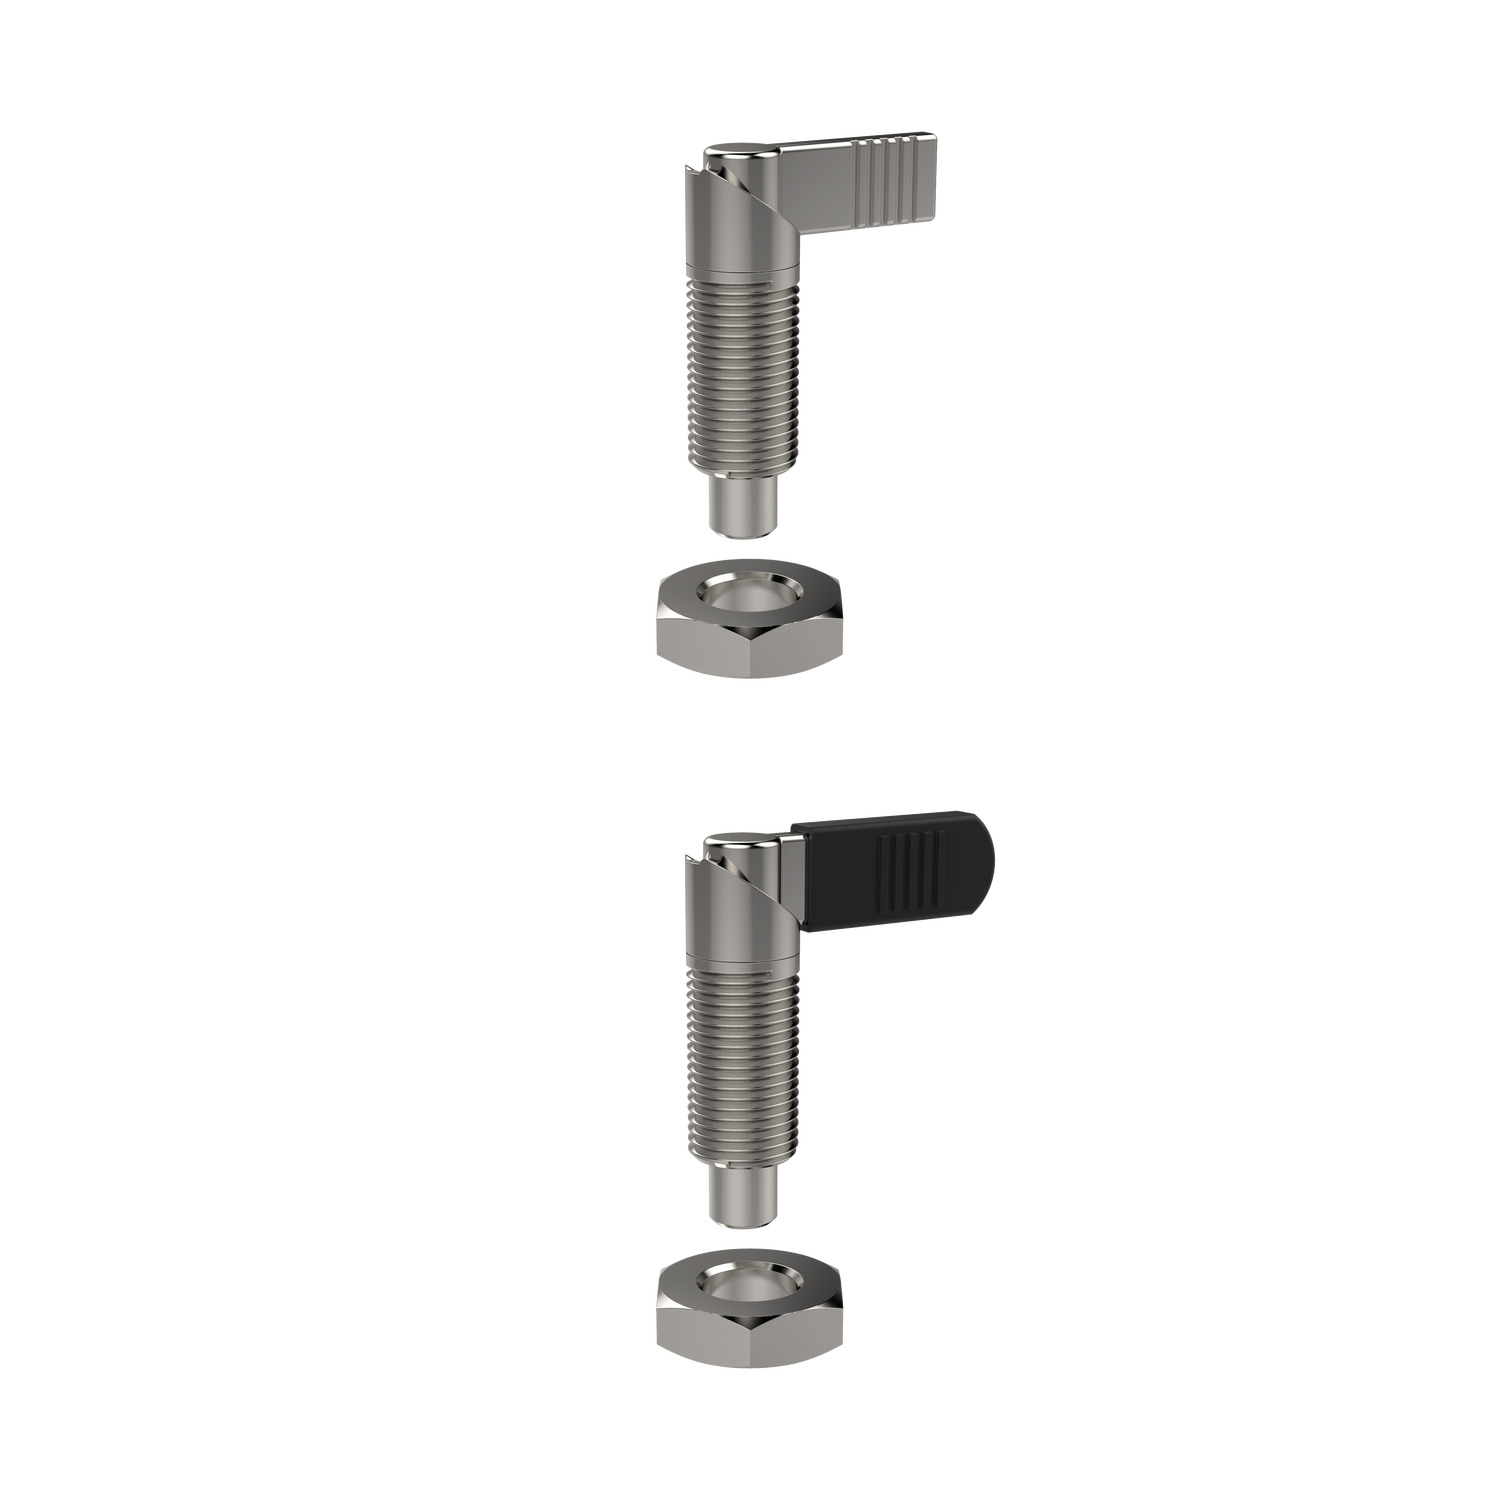 Index Plungers - Lever Grip Stainless steel locking lever grip index plunger with or without plastic handle. Actuate via 180° turn to retract pin and secure in notch to lock the pin whilst retracted.